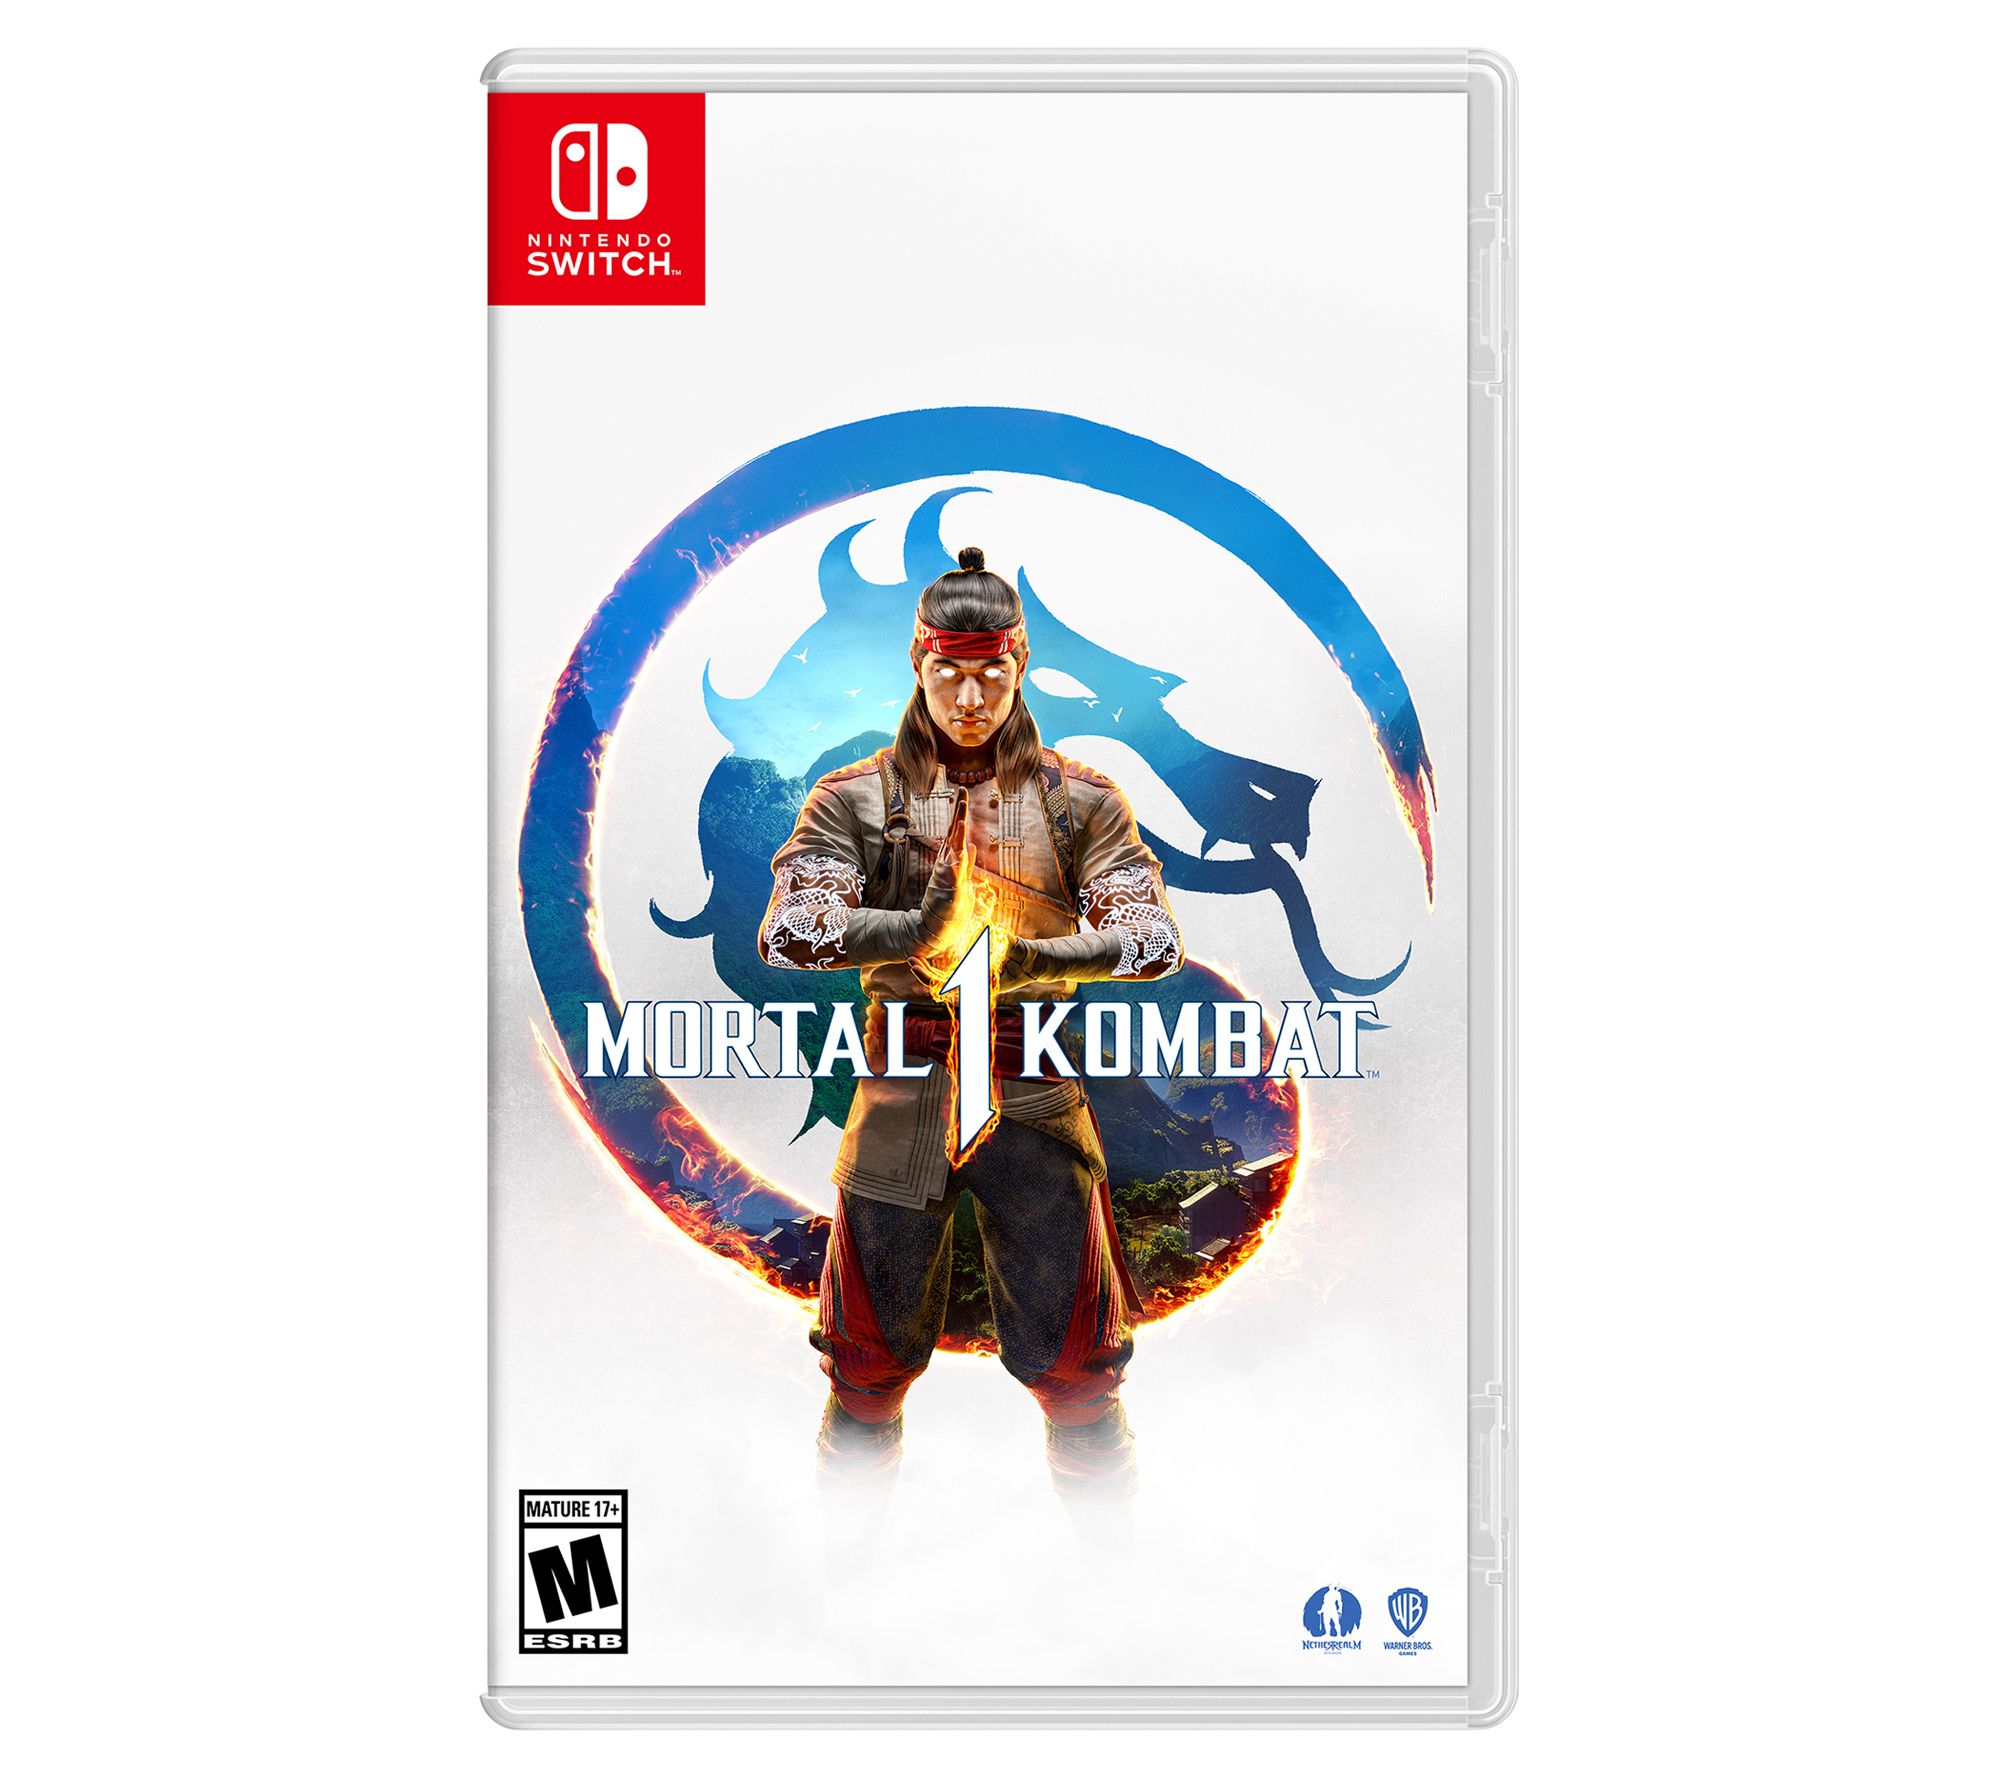 It's true: Mortal Kombat 1 on Switch is just too big an ask for